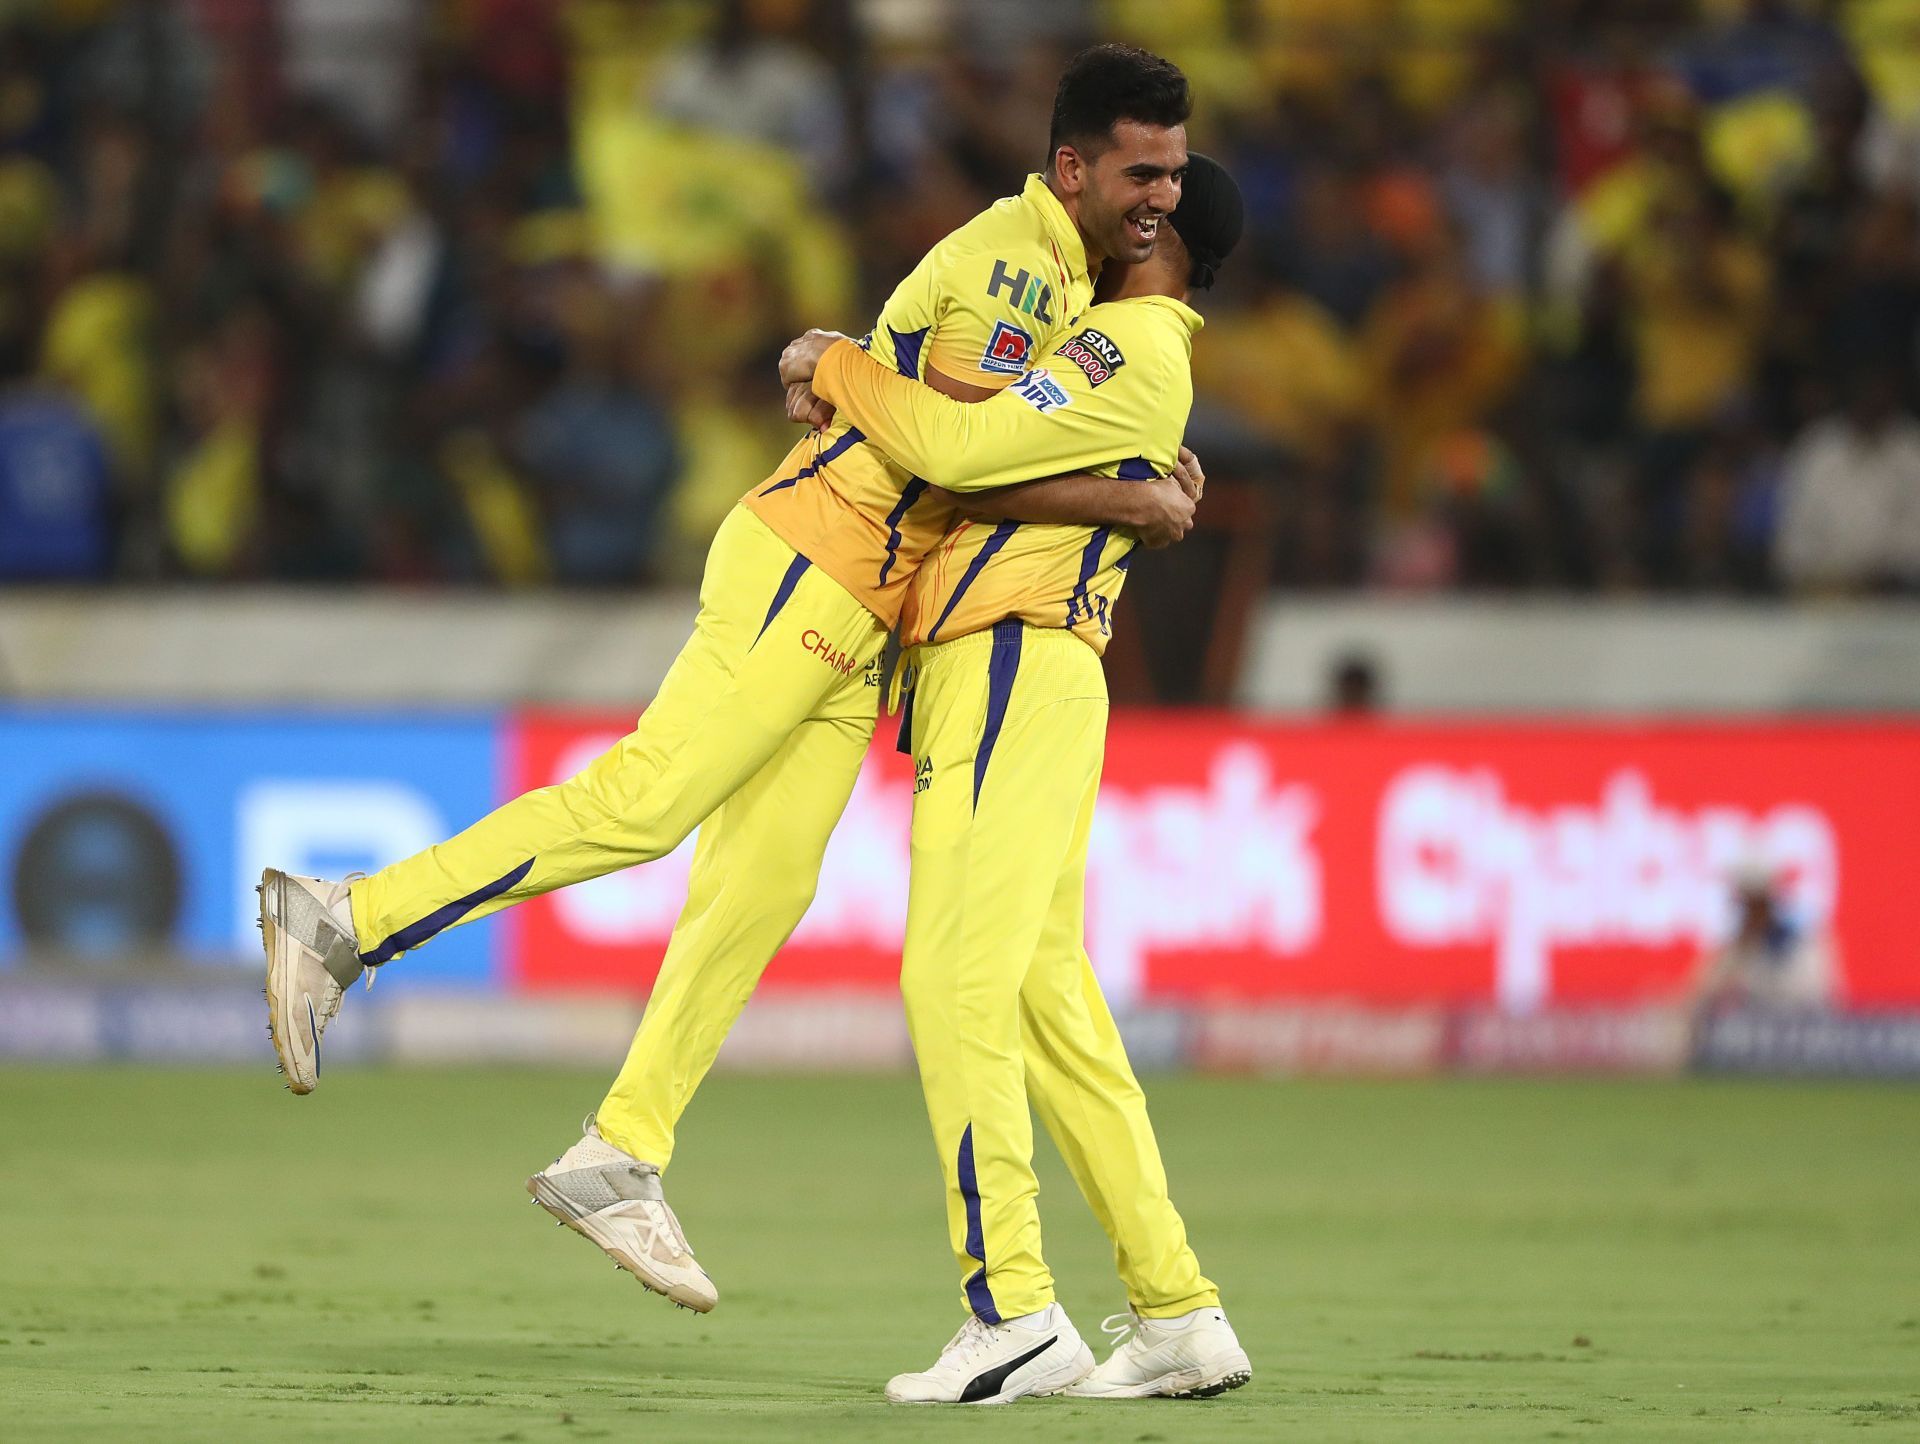 Deepak has been a match-winner for the Chennai Super Kings in the IPL